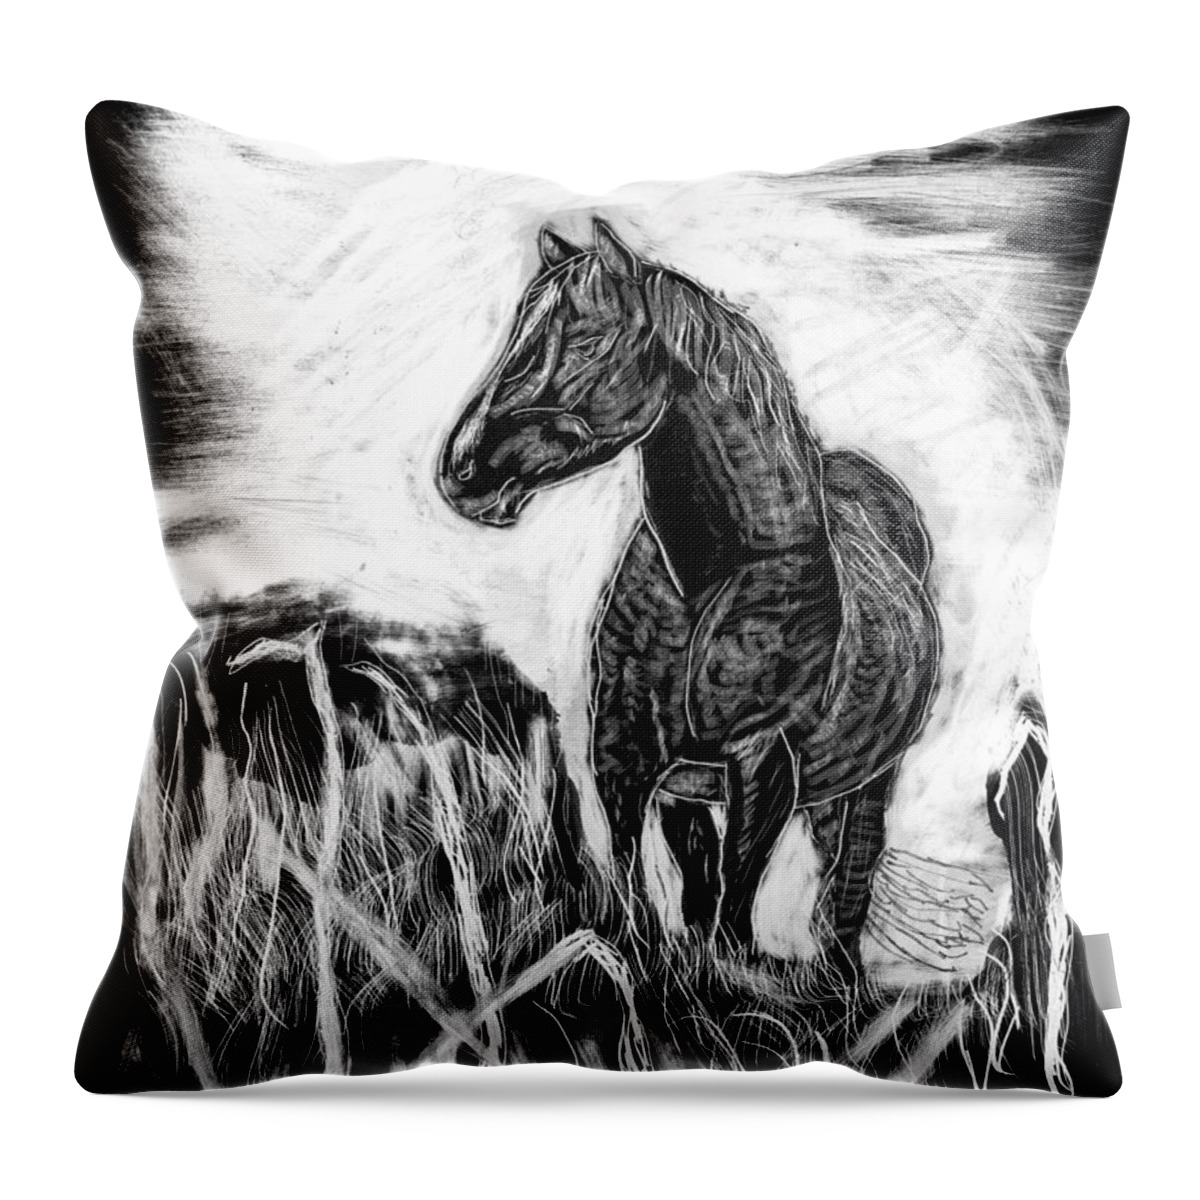 Mustang Throw Pillow featuring the drawing Mustang by Branwen Drew